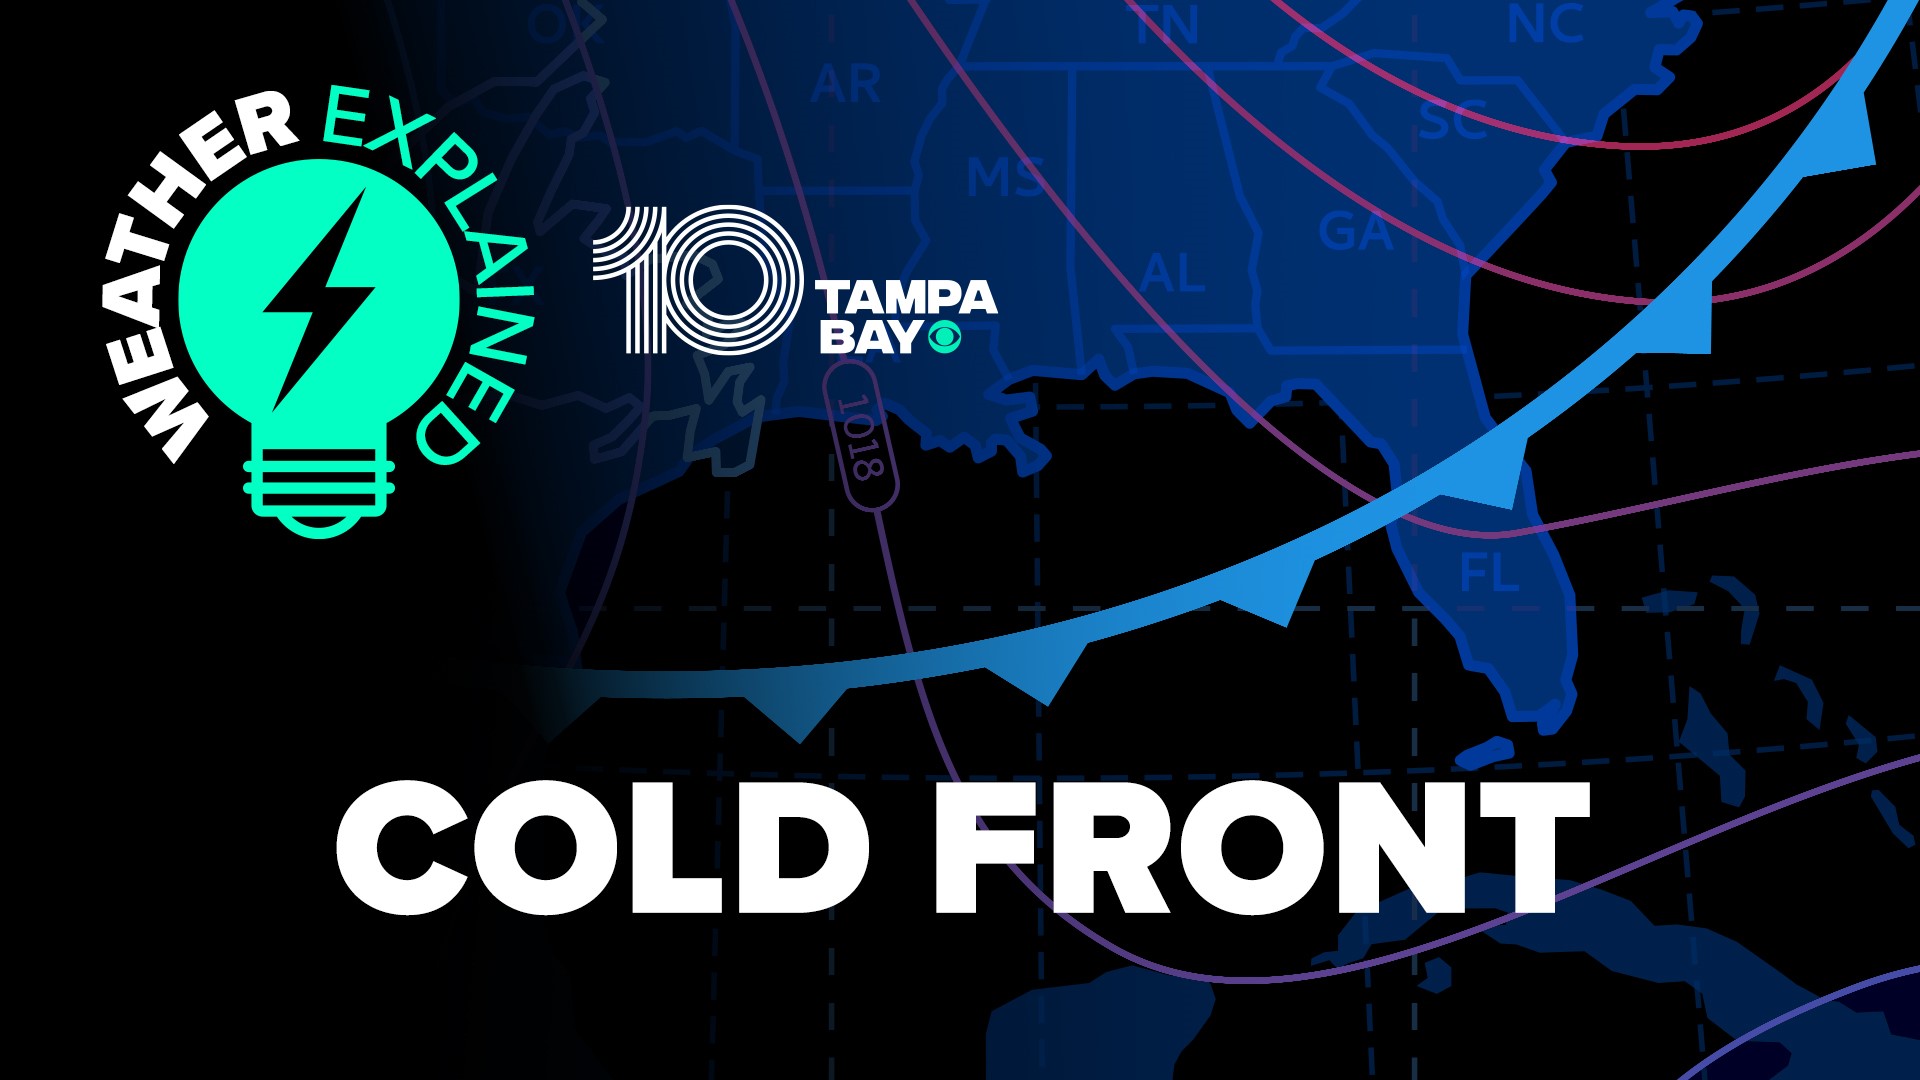 10 Tampa Bay meteorologist Grant Gilmore explains cold fronts and how they impact Florida weather.